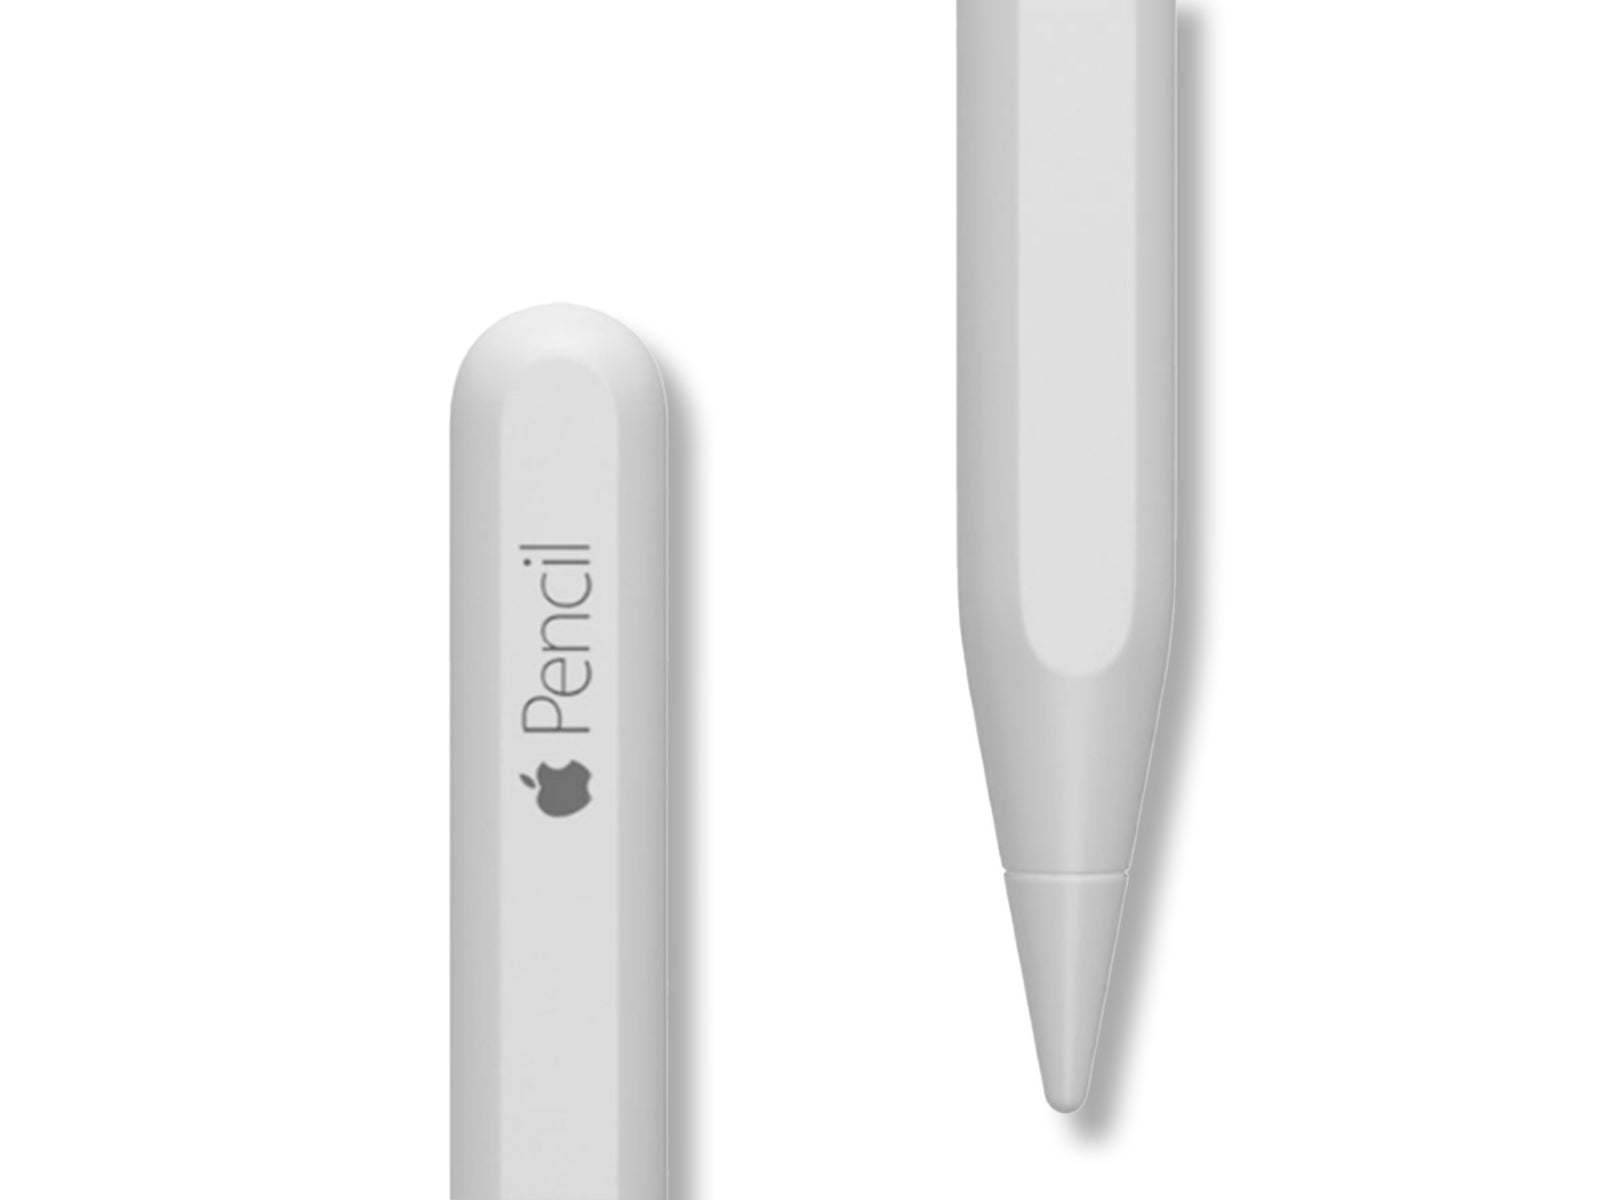 Image shows close up view of tip and end of apple pencil on white background